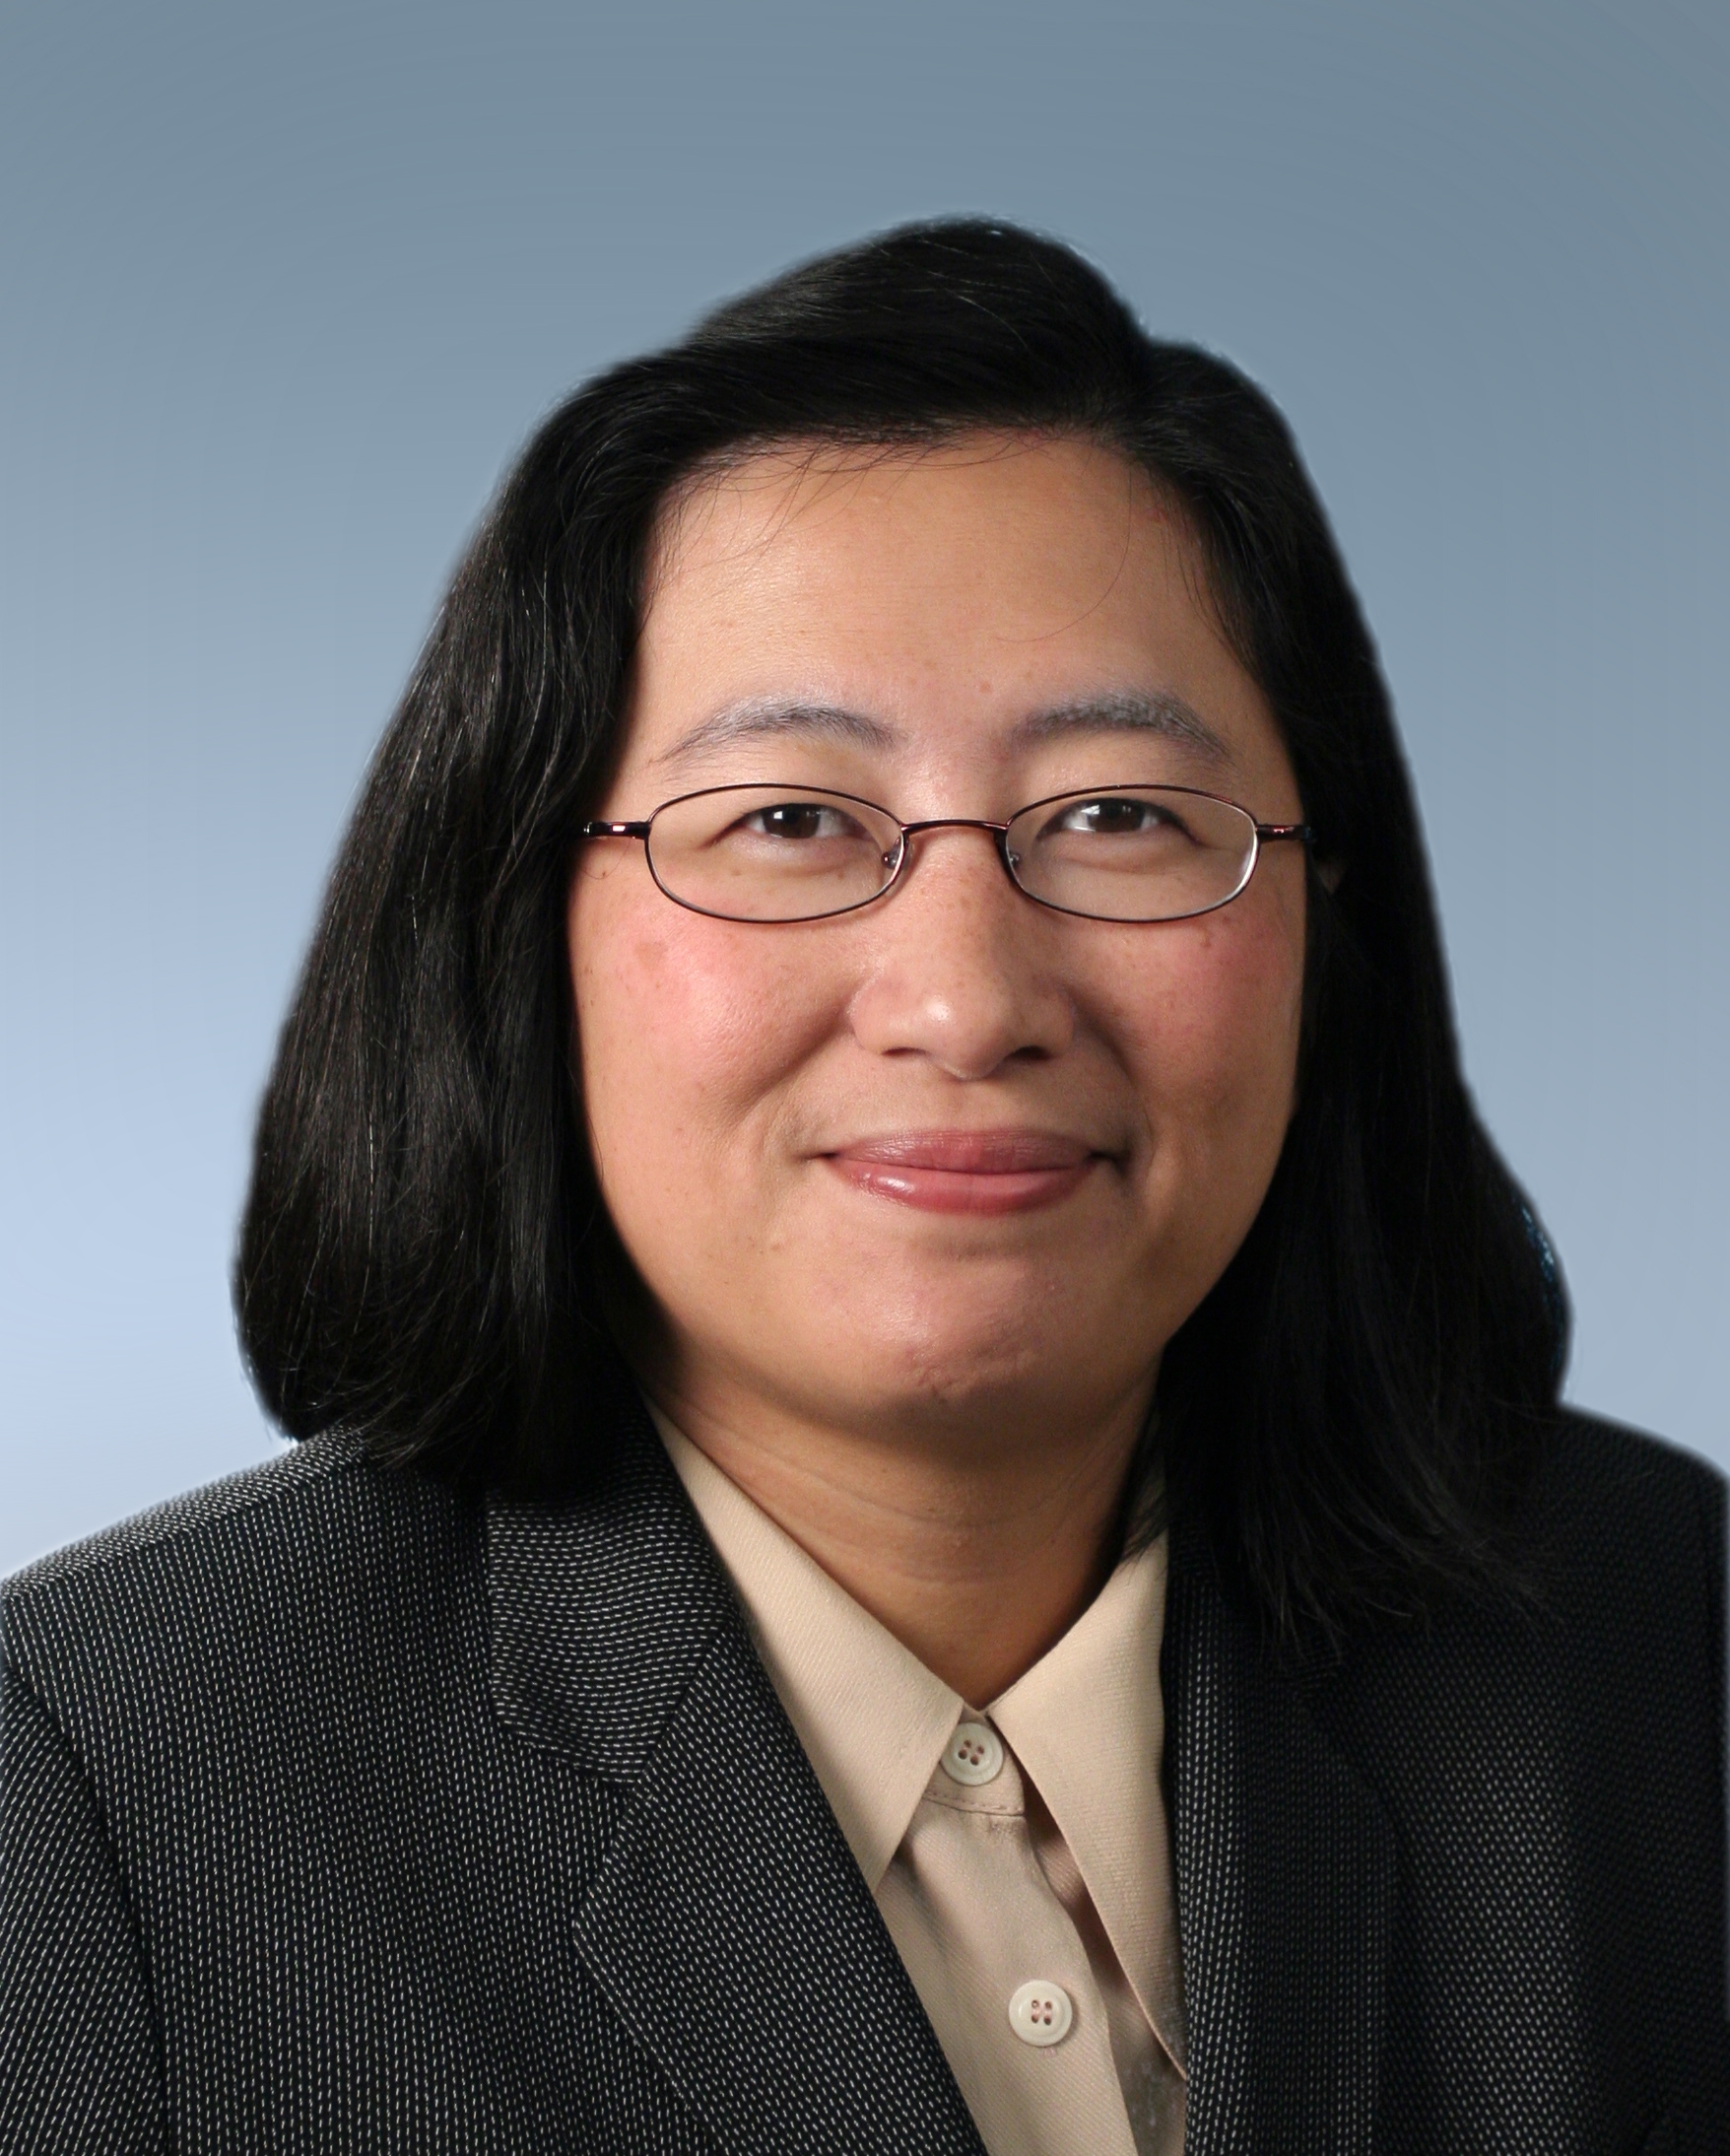 AMD Appoints Dr. Lisa Su as President and Chief Executive Officer